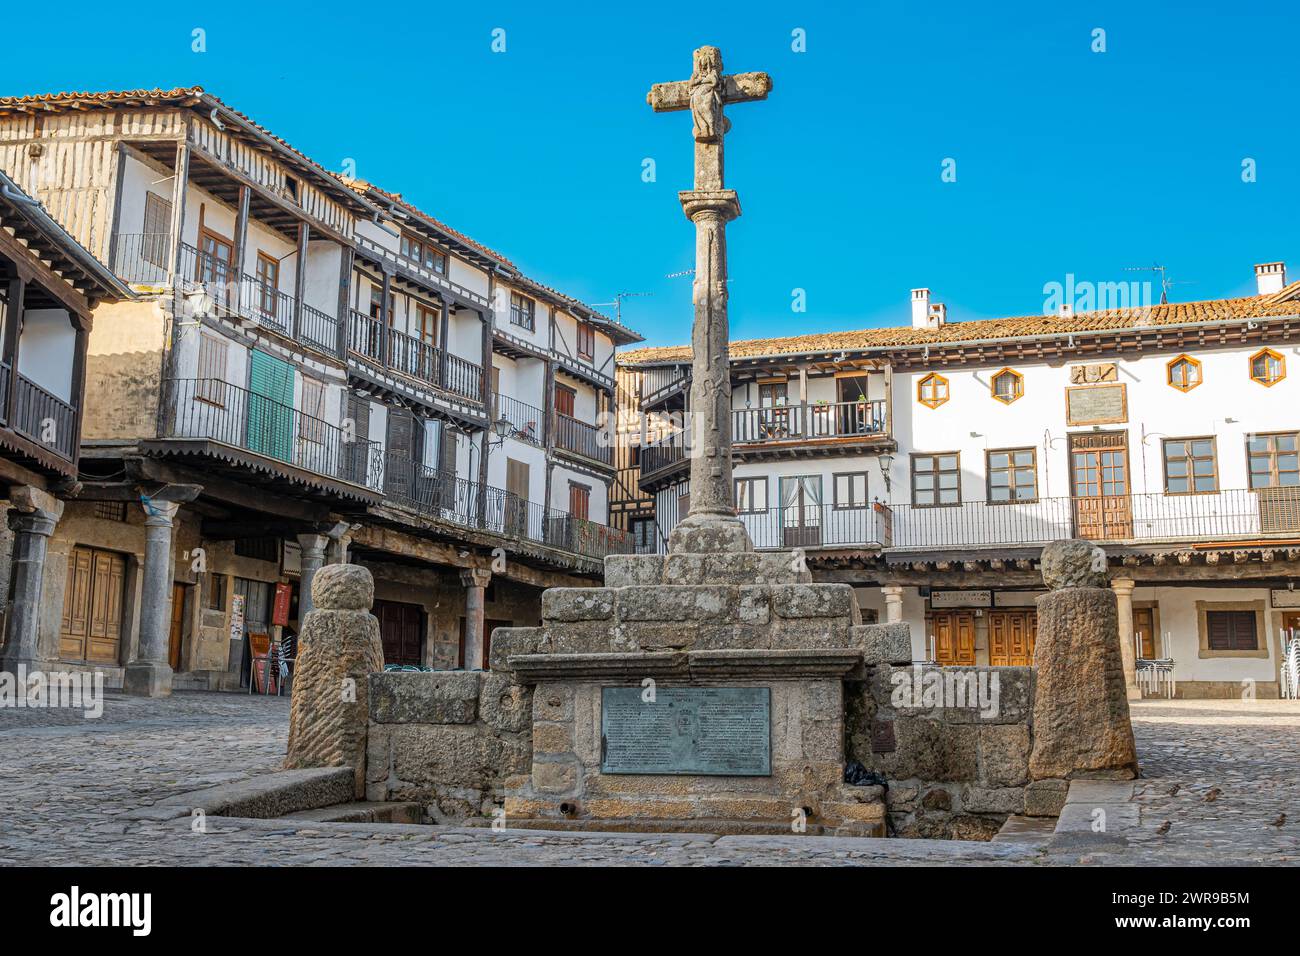 An Eighteenth-century fountain and transept in the main square of the beautiful medieval village of La Alberca, Spain Stock Photo